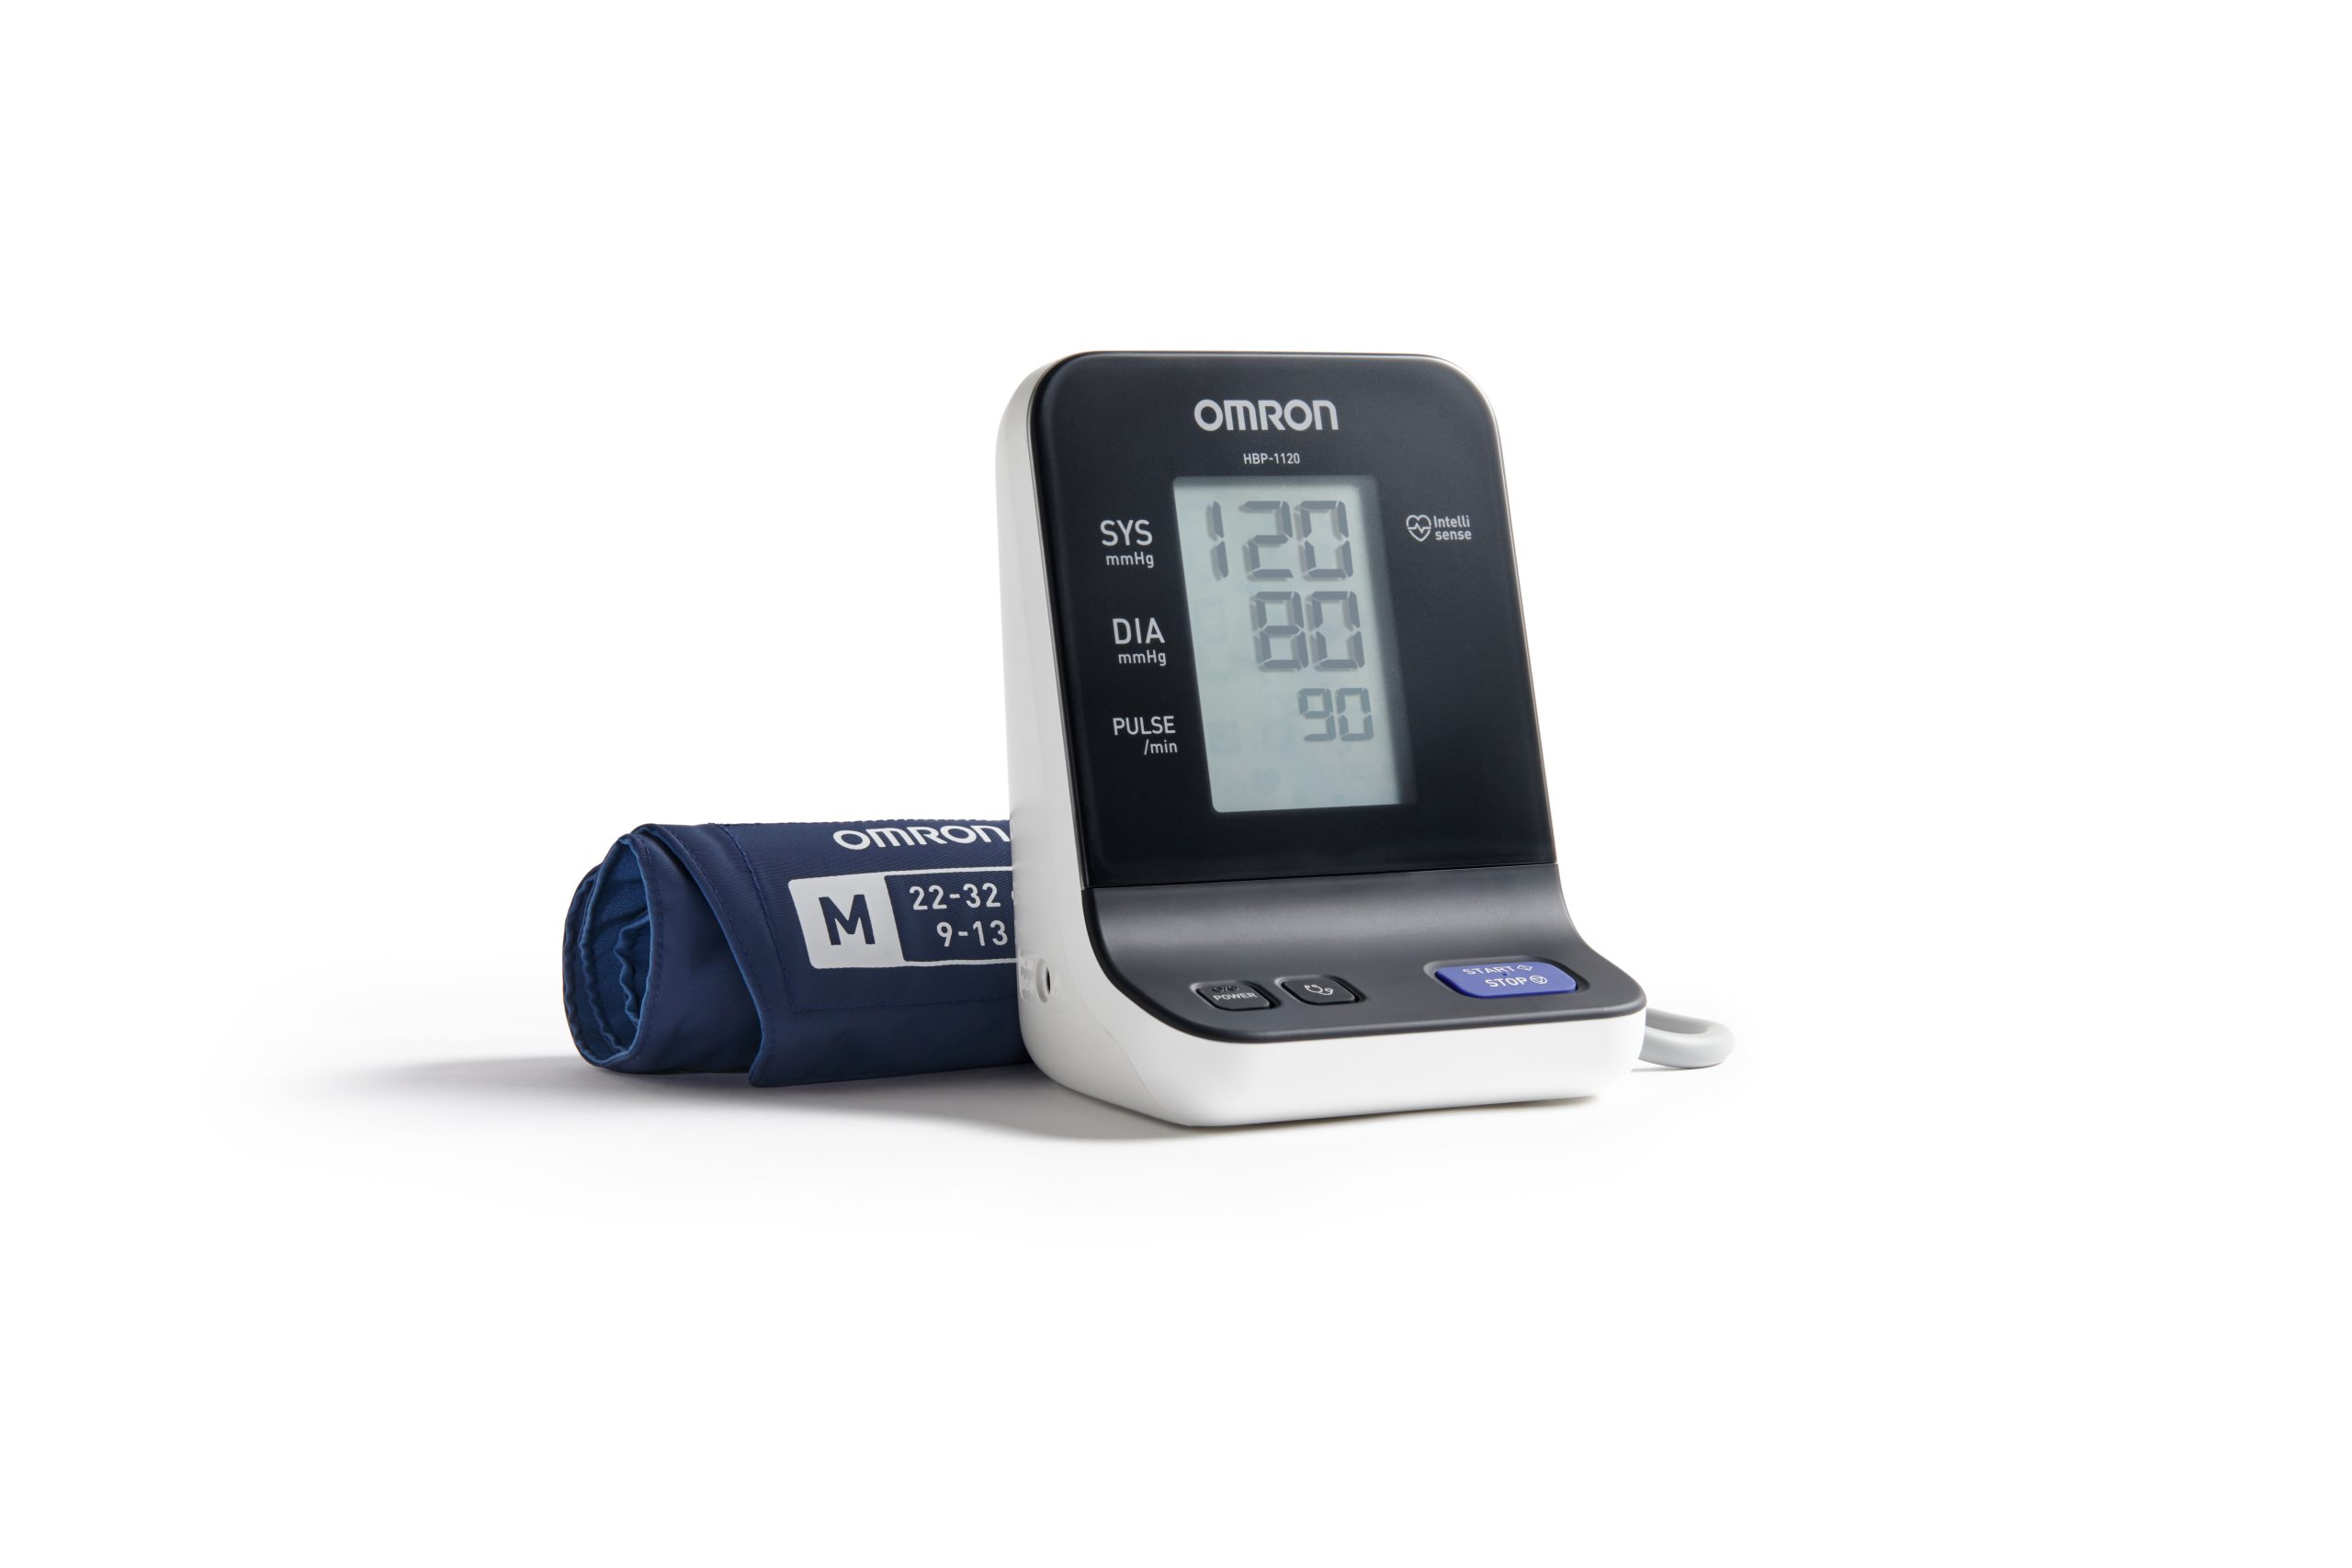 Omron RS7 Intelli IT Handheld Blood Pressure Monitor - Devices & Tests 